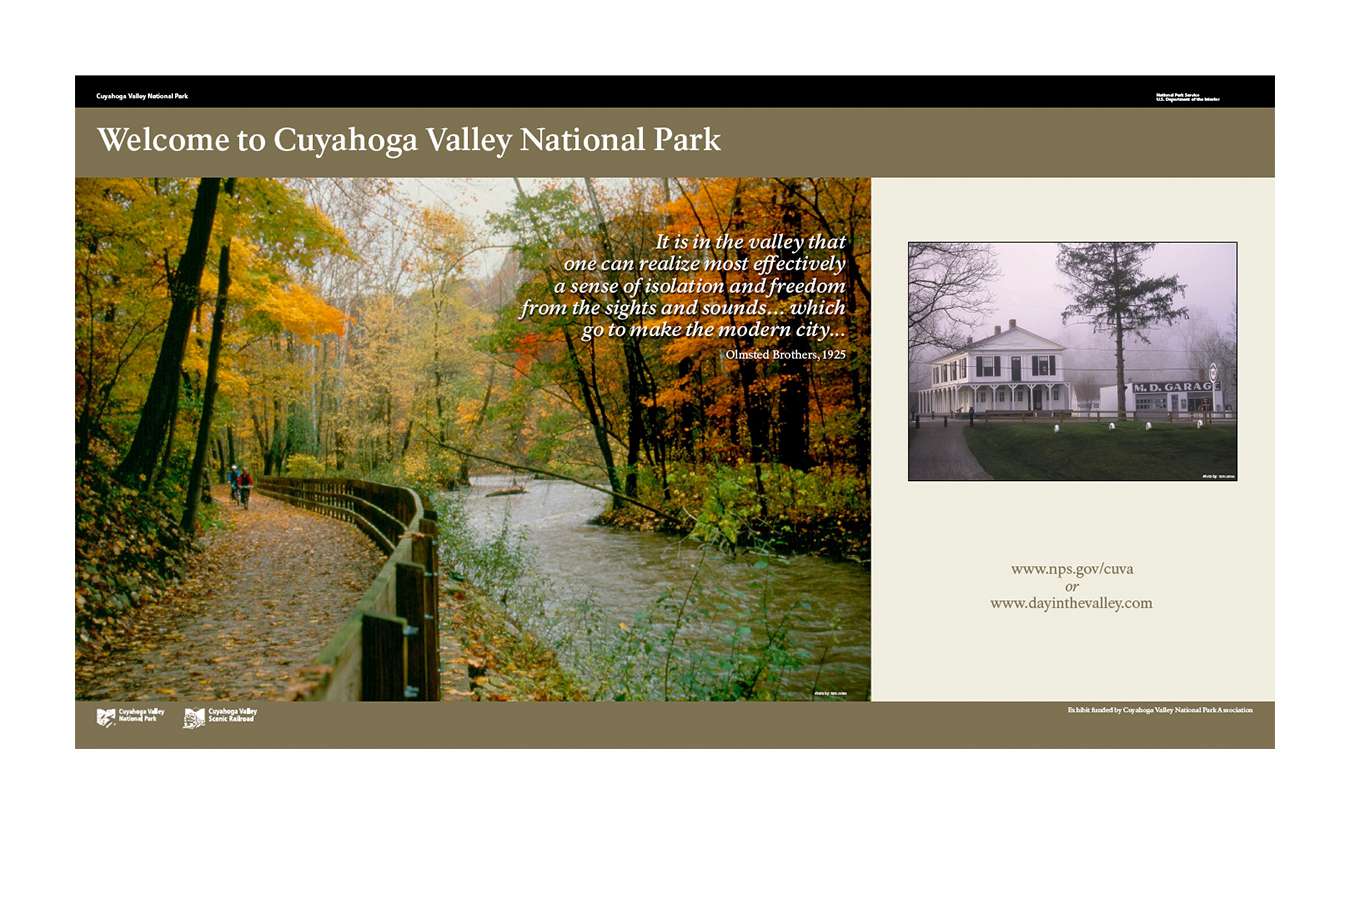 CUVA NPS 2 : Wall panels for visitor centers located in this 50 square mile park along the Cuyahoga River.  The park extends between Cleveland and Akron, Ohio and is the only national park in the state